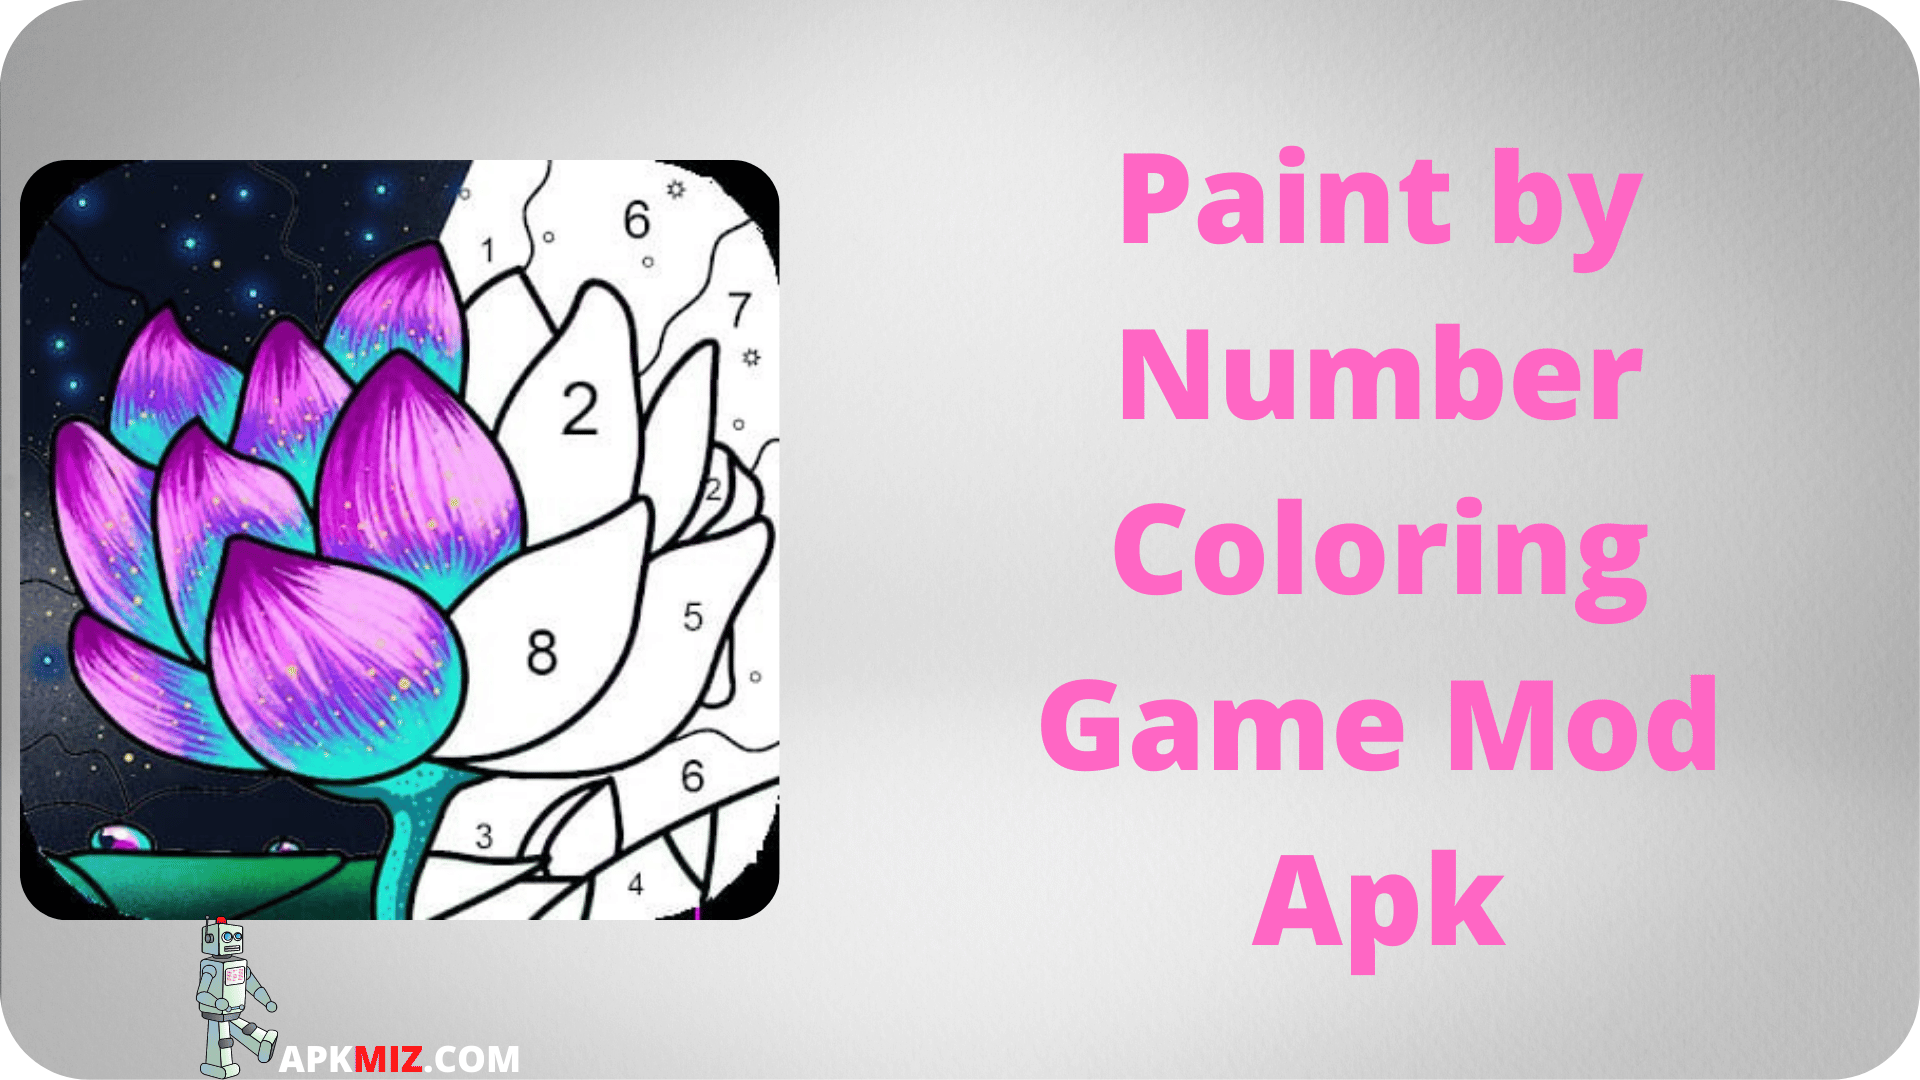 Paint by Number Coloring Game Mod Apk